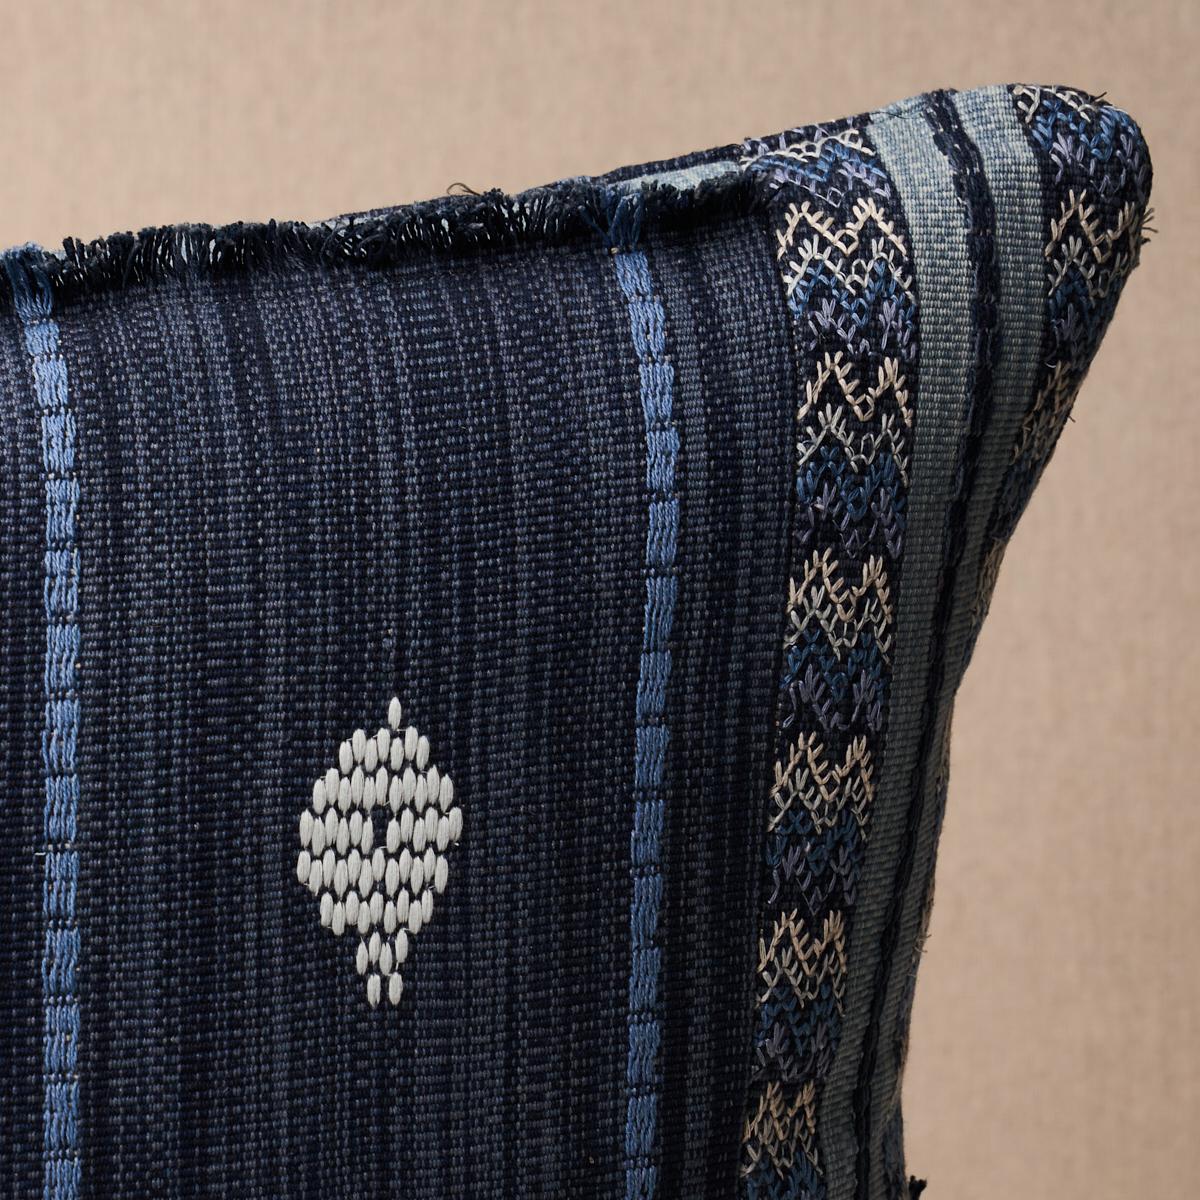 This pillow features Aravali Patchwork with a knife edge finish. Inspired by the rich colors and tribal symbols associated with Berber rugs, Aravali Patchwork in denim-and-indigo is a woven geometric design that combines checks, stripes and delicate